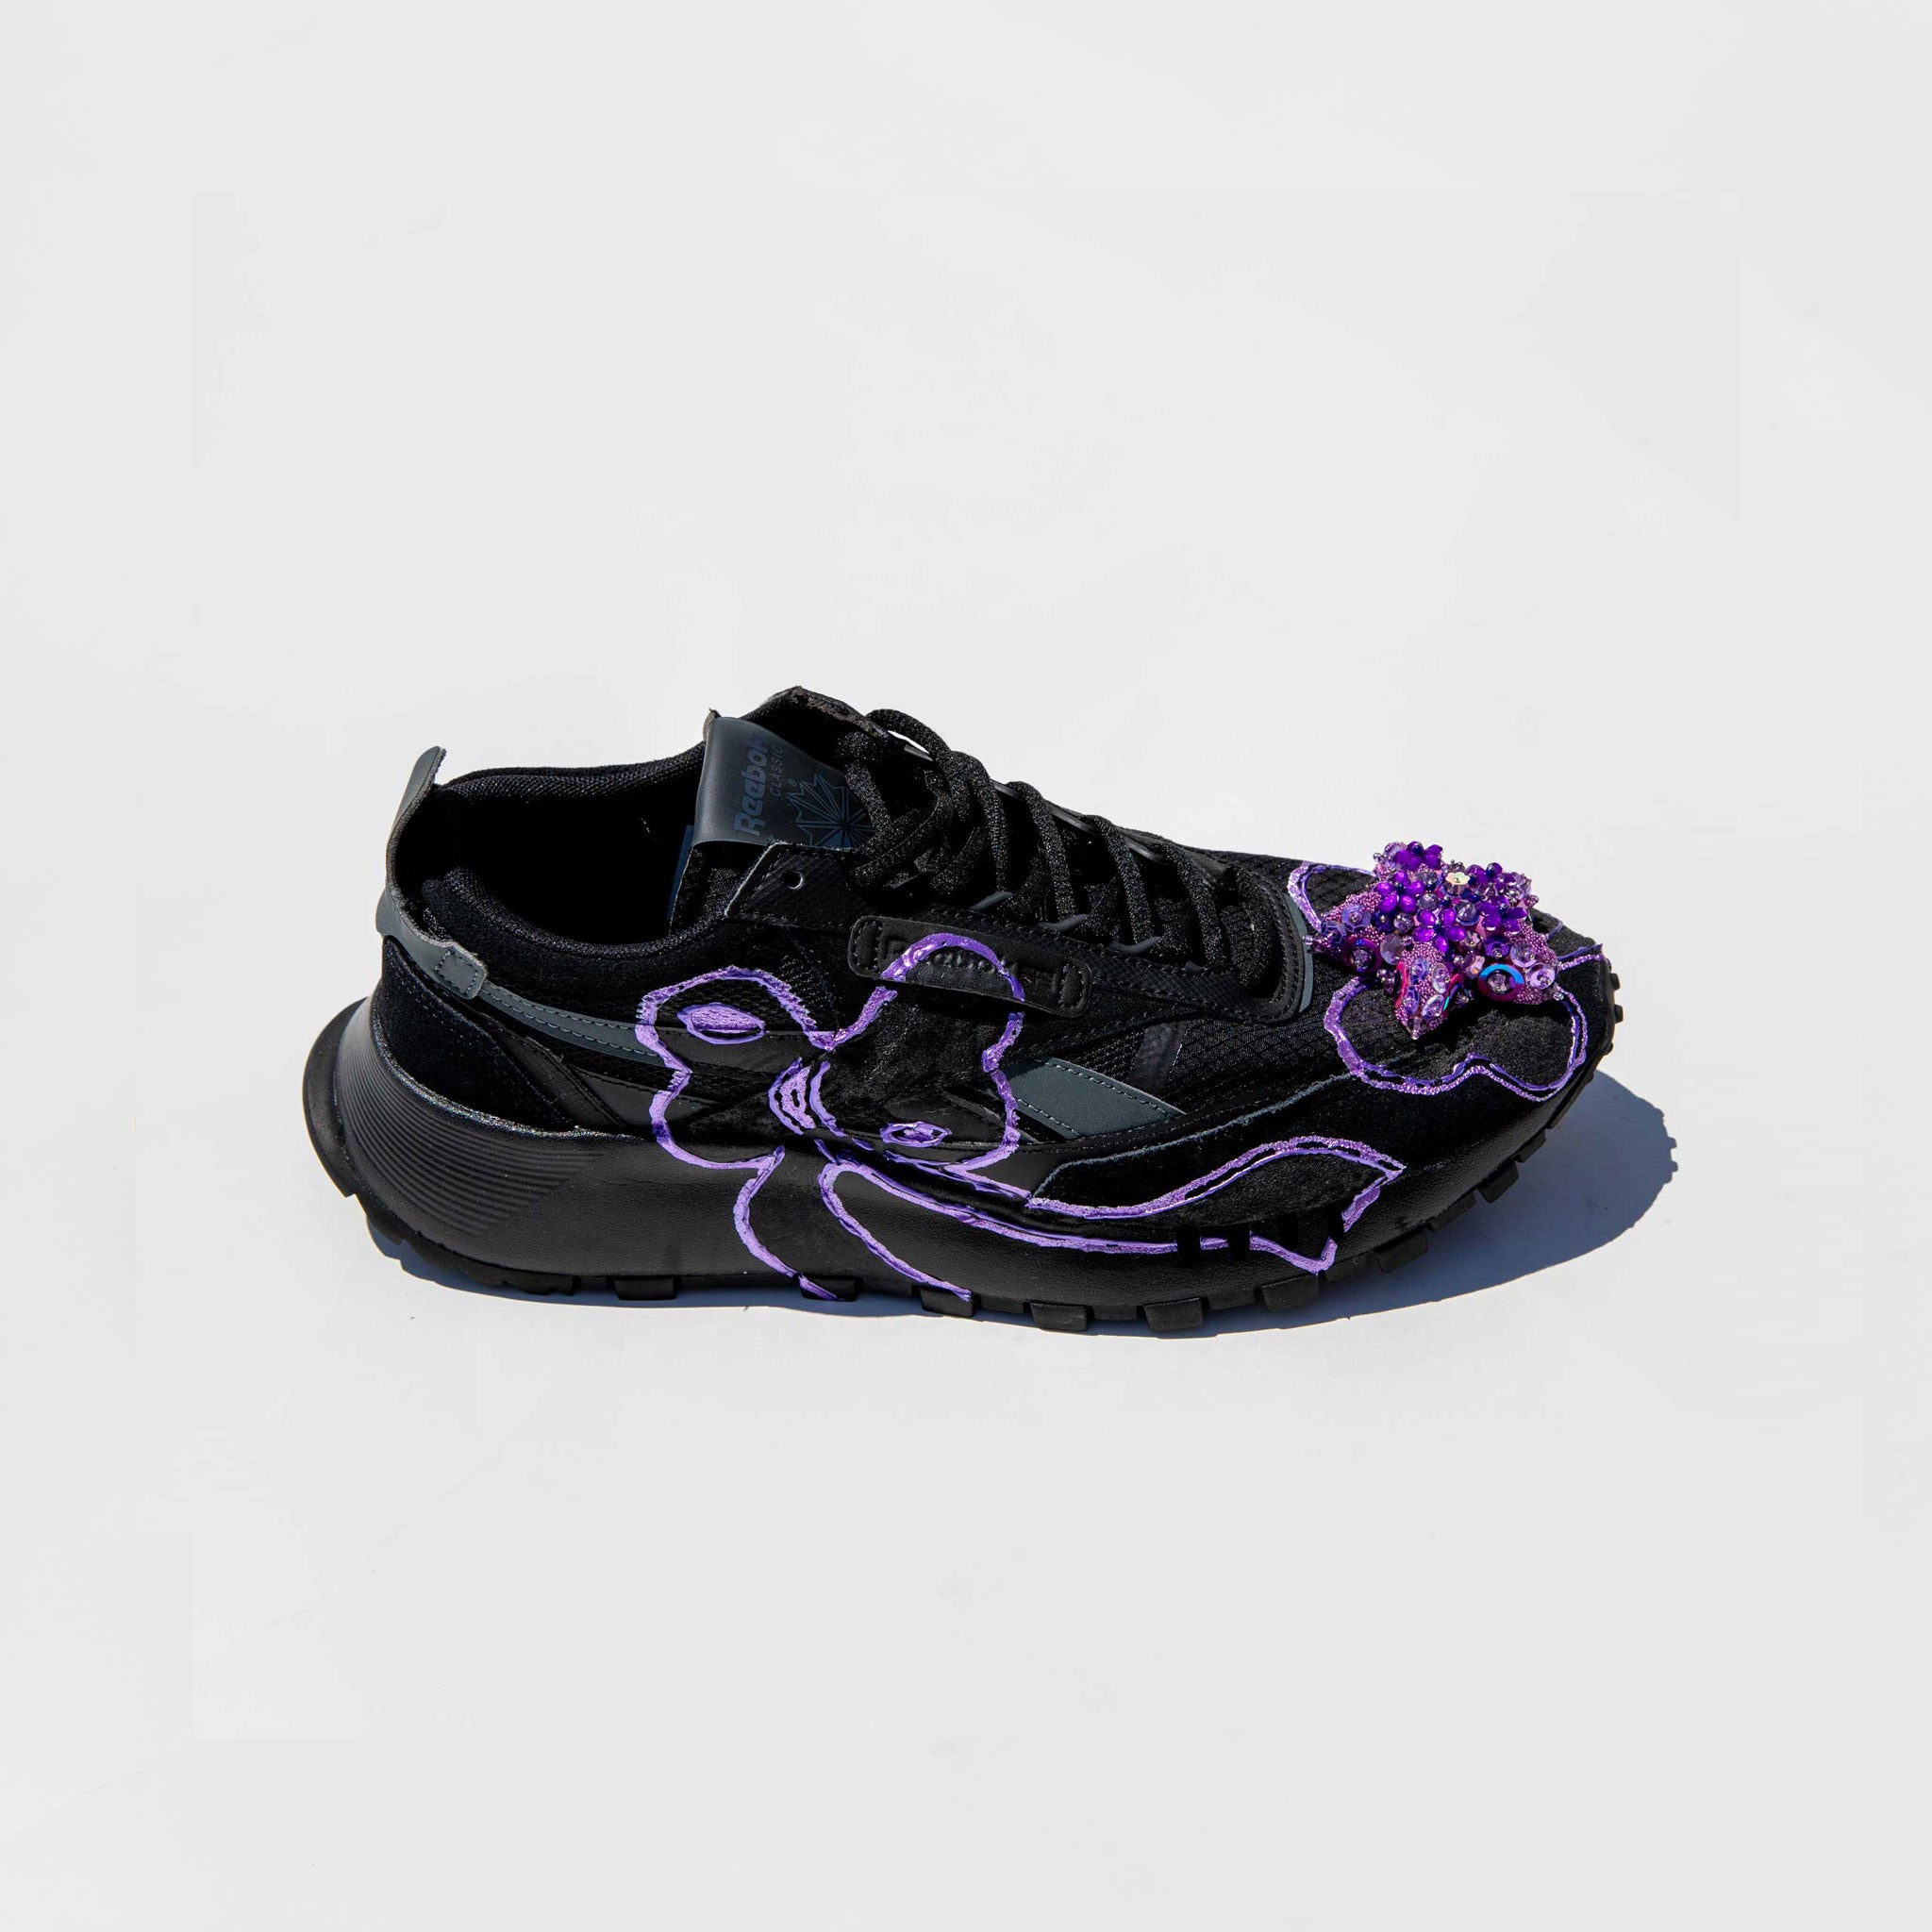 Collina Strada Reebok Black with Purple Sequin Toe - Size 8.5 [Runway Sample] | available at LCD